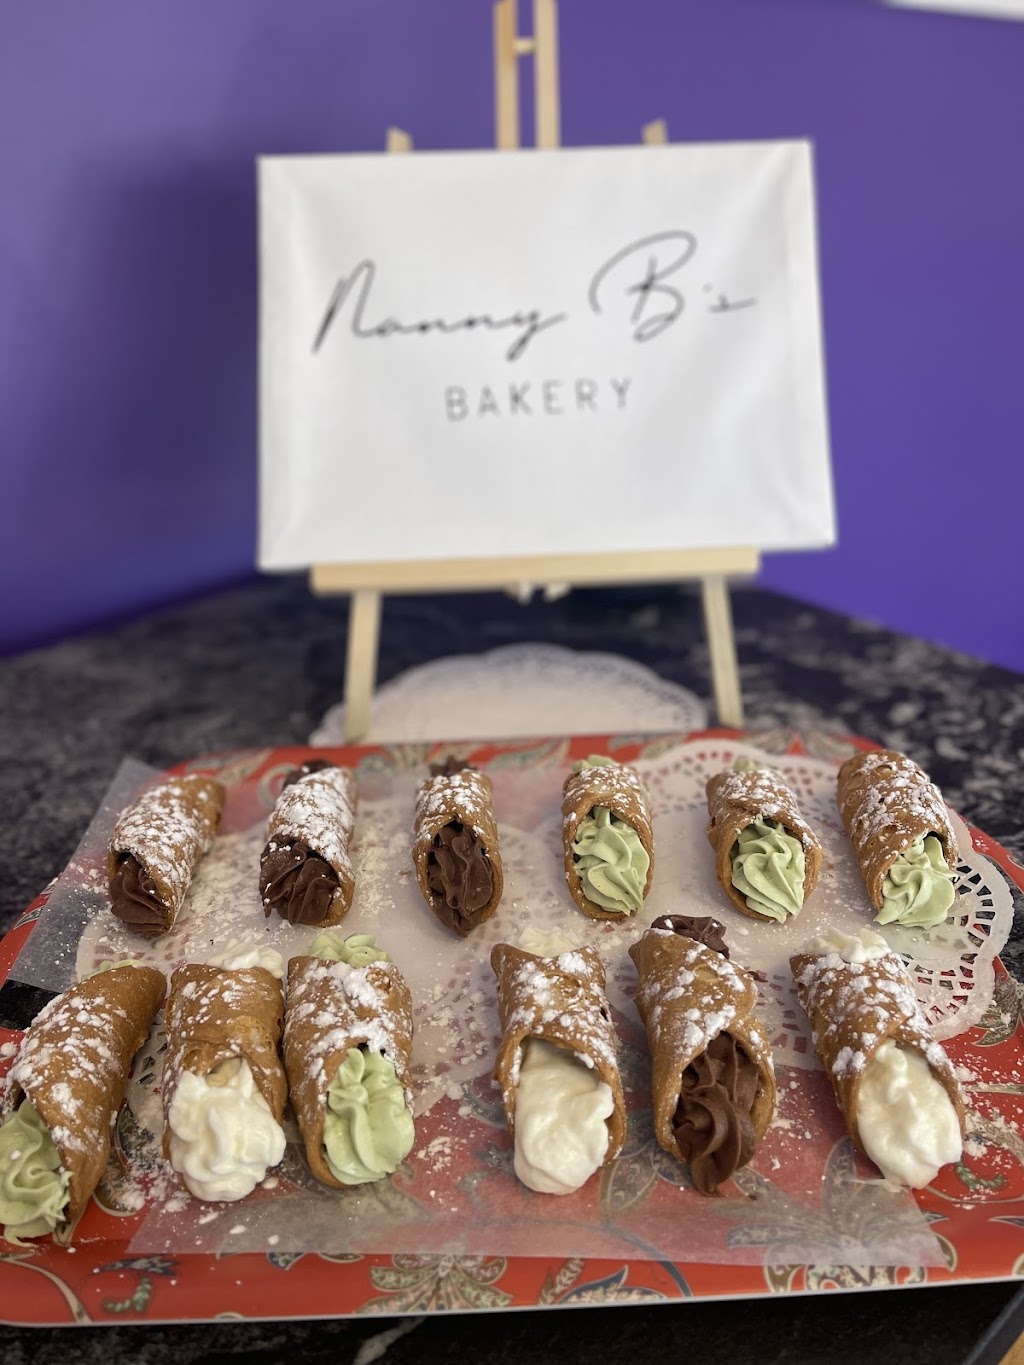 Nanny Bs Bakery | 62 Commerce Park Dr Unit L, Barrie, ON L4N 8W8, Canada | Phone: (705) 503-4966